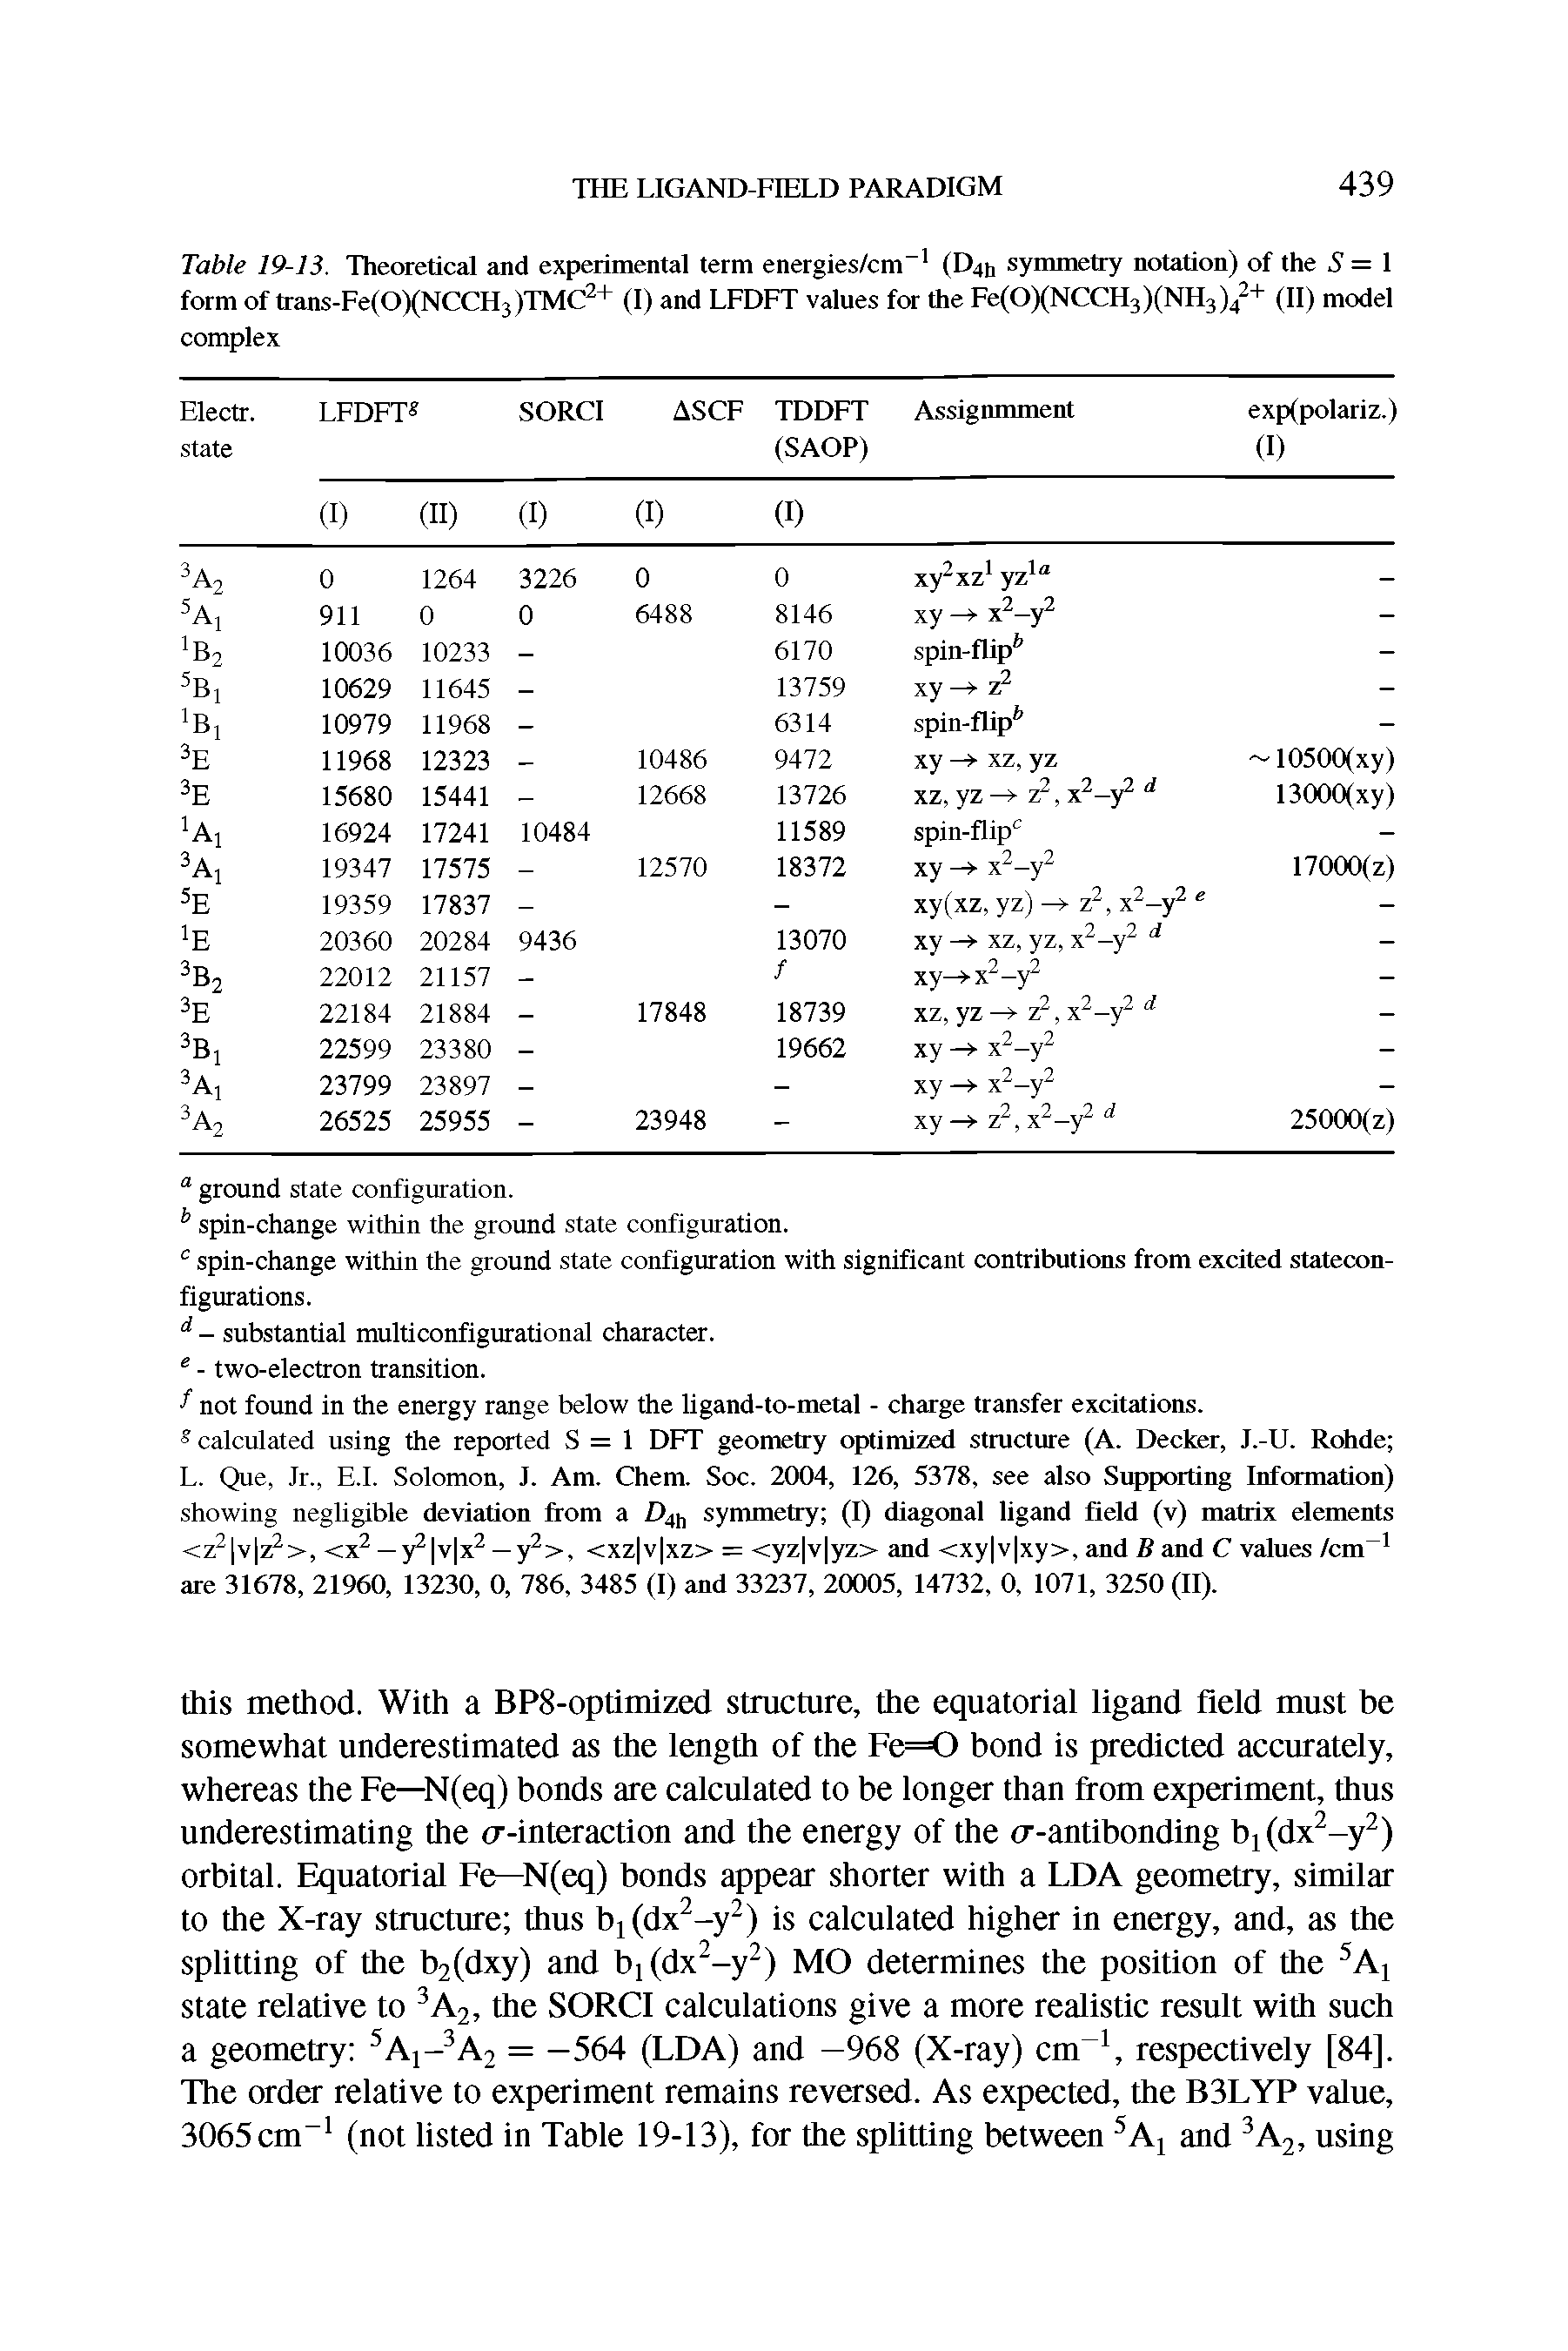 Table 19-13. Theoretical and experimental term energies/cm (D411 symmetry notation) of the 5 = 1 form of trans-Fe(0)(NCCH3)TMC + (I) and LFDFT values for the Fe(0)(NCCH3)(NH3)/+ (II) model complex...